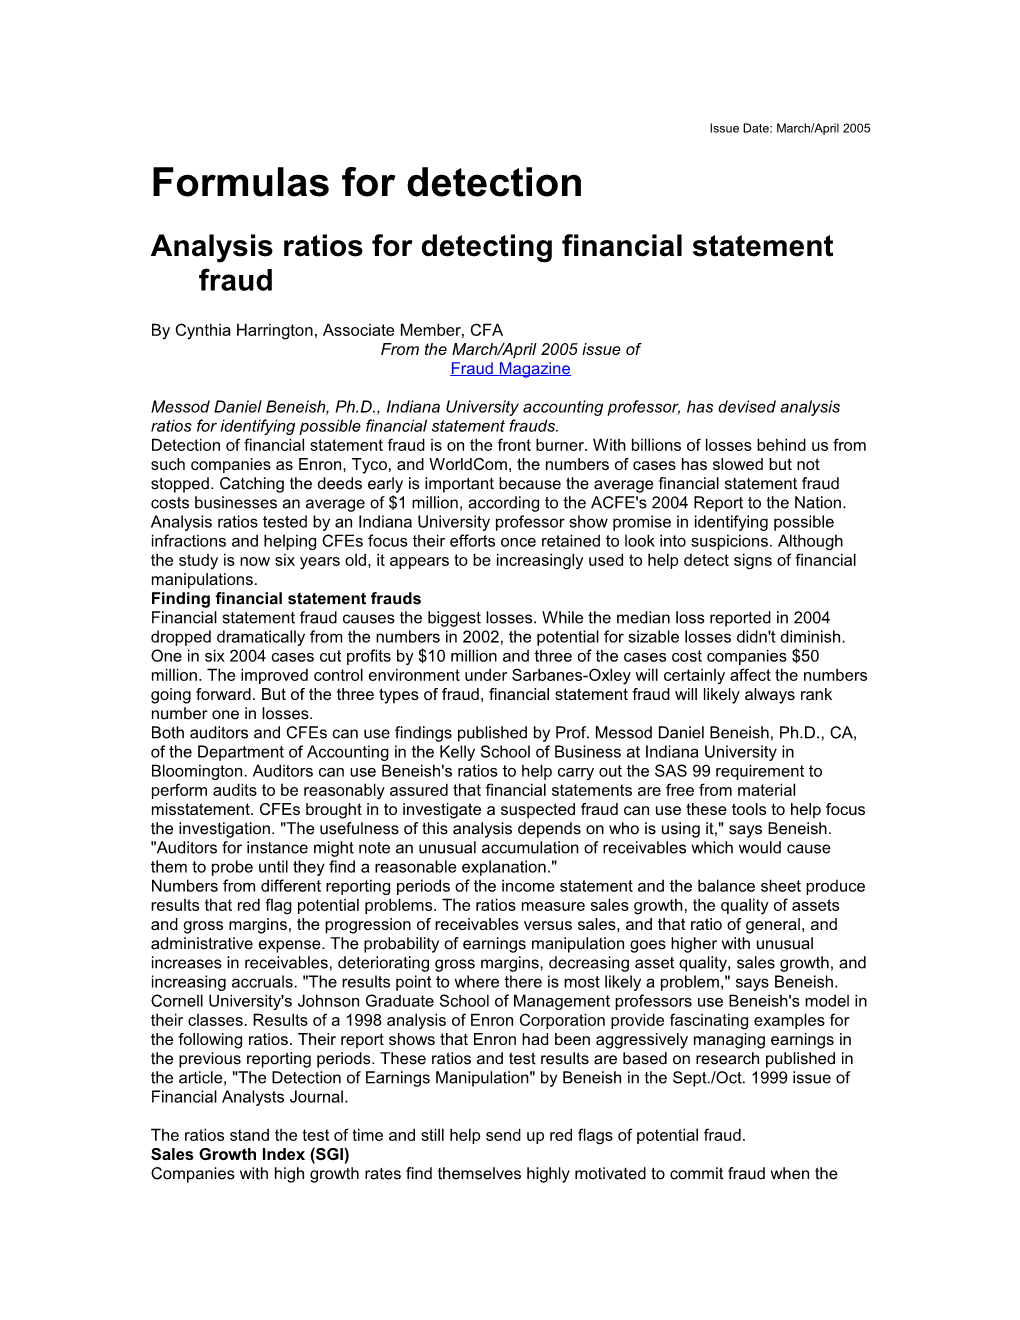 Analysis Ratios for Detecting Financial Statement Fraud